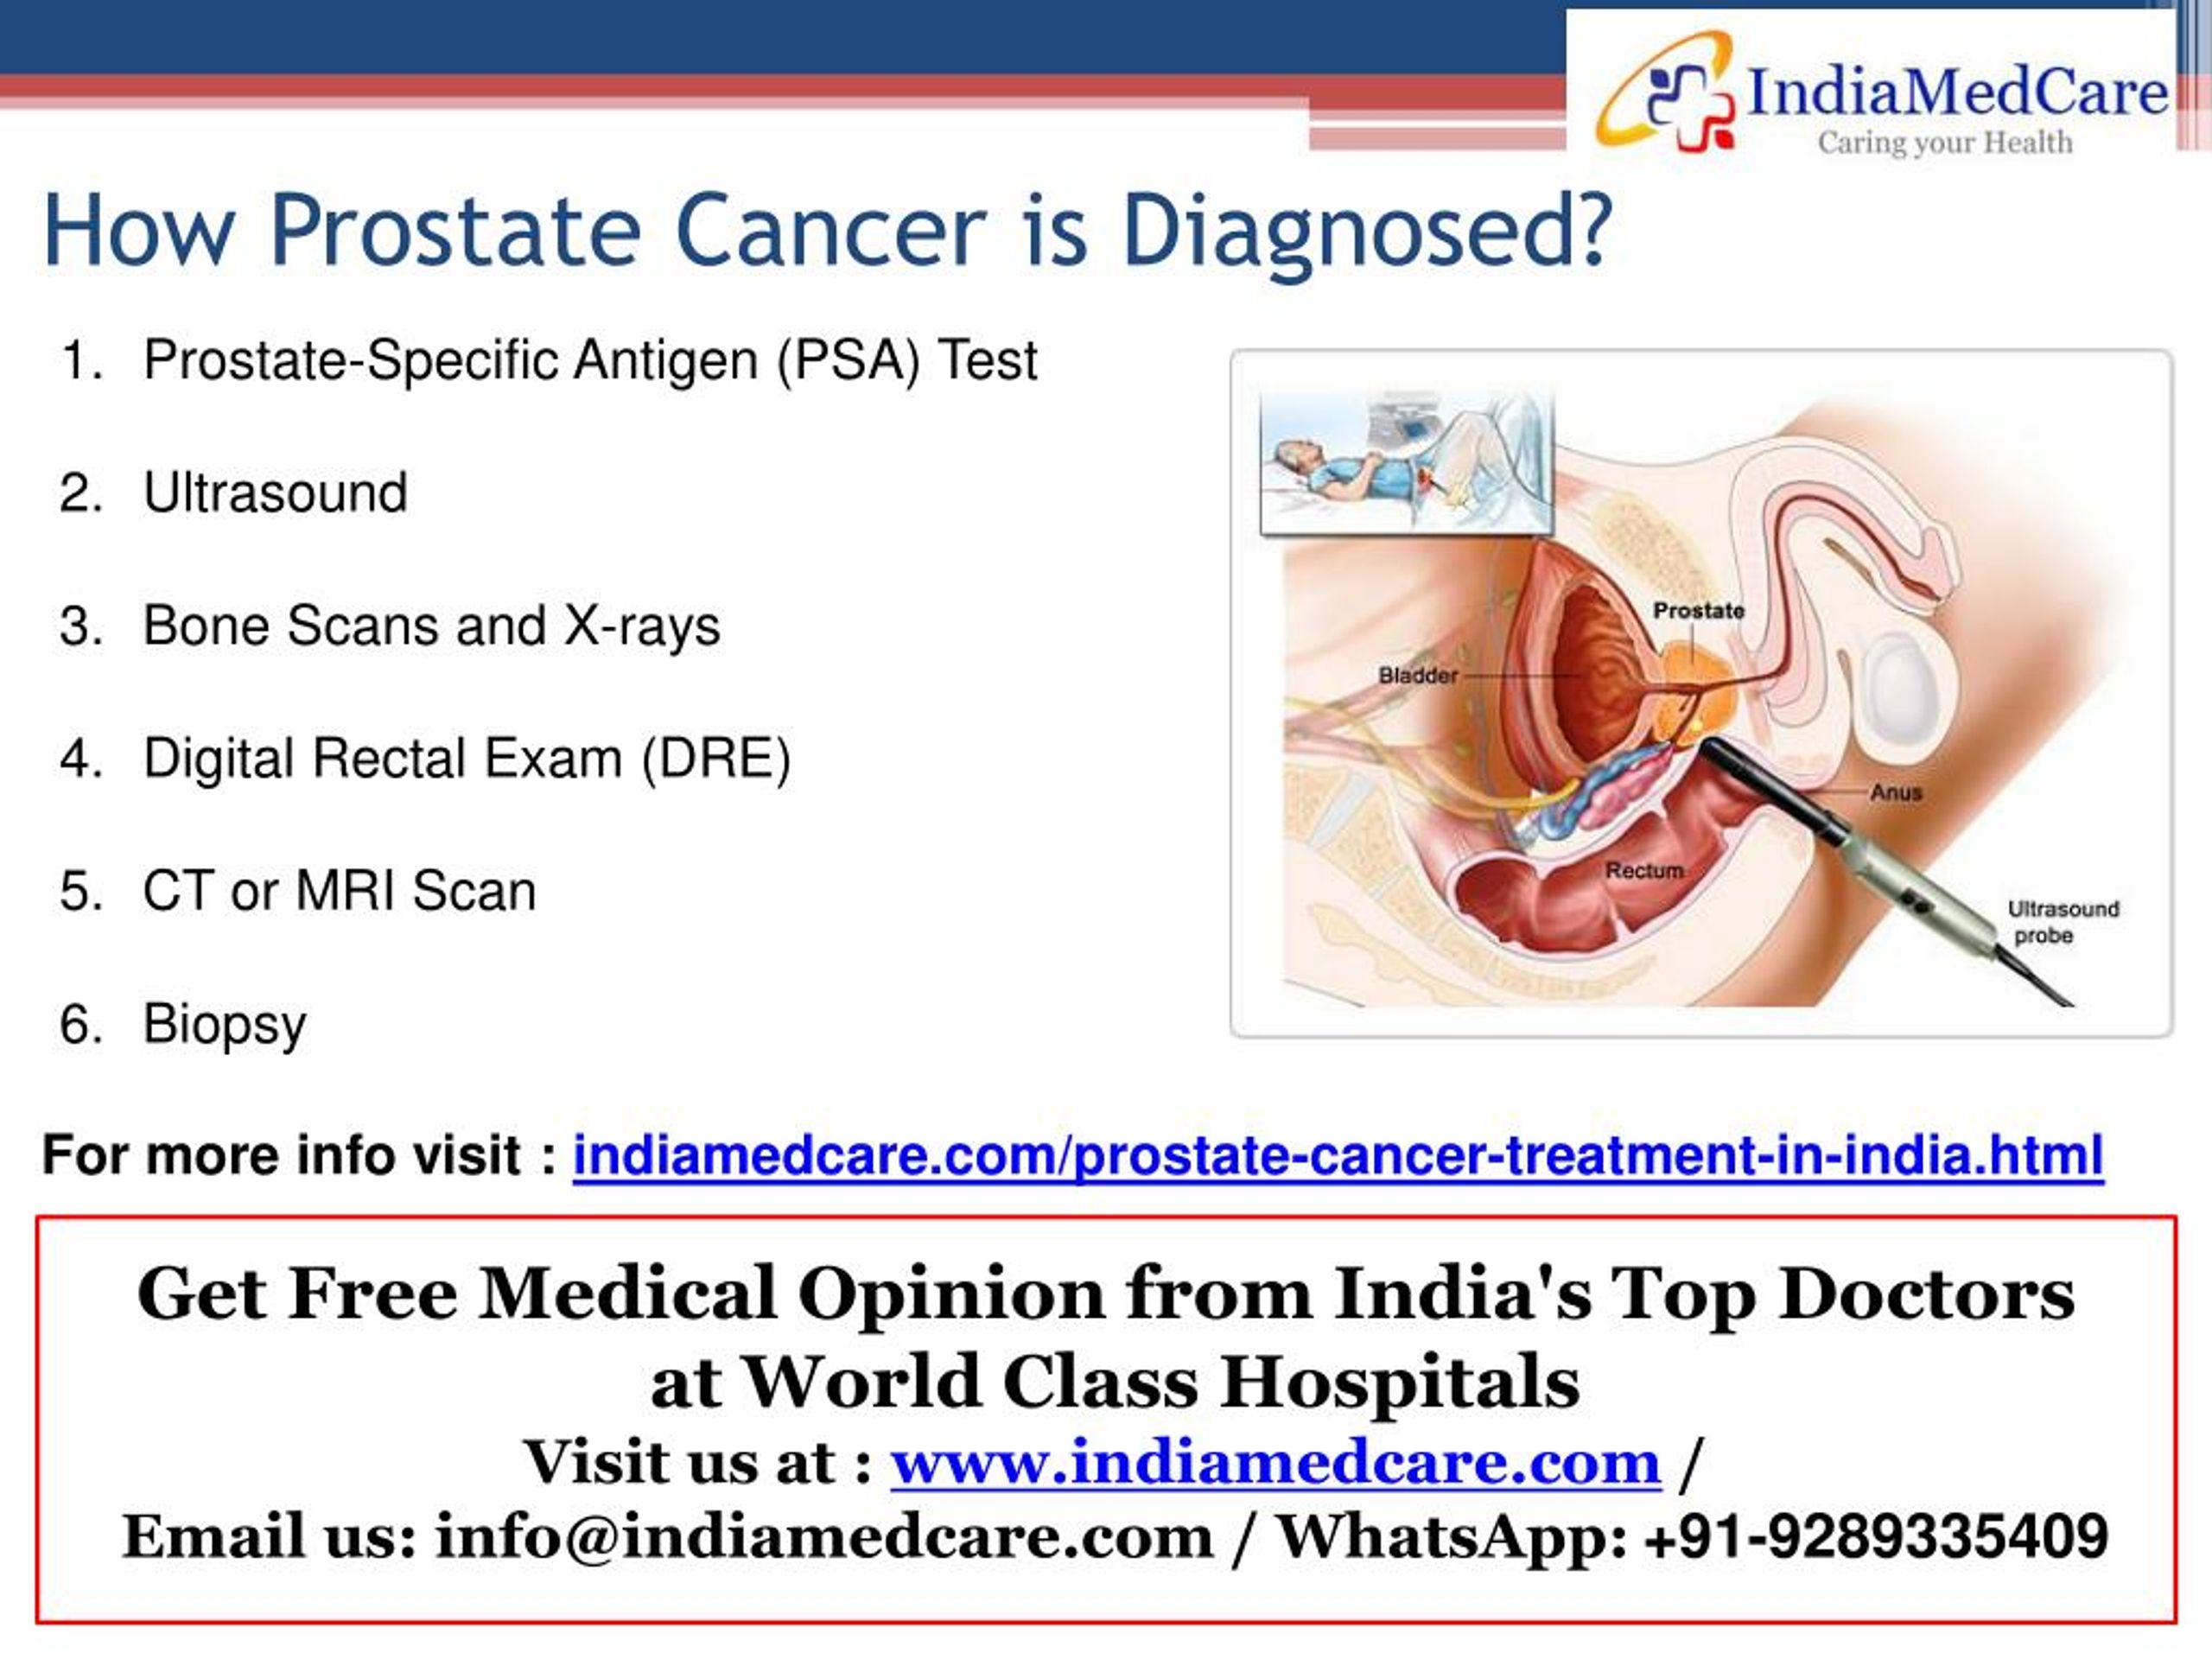 How to check for prostate cancer